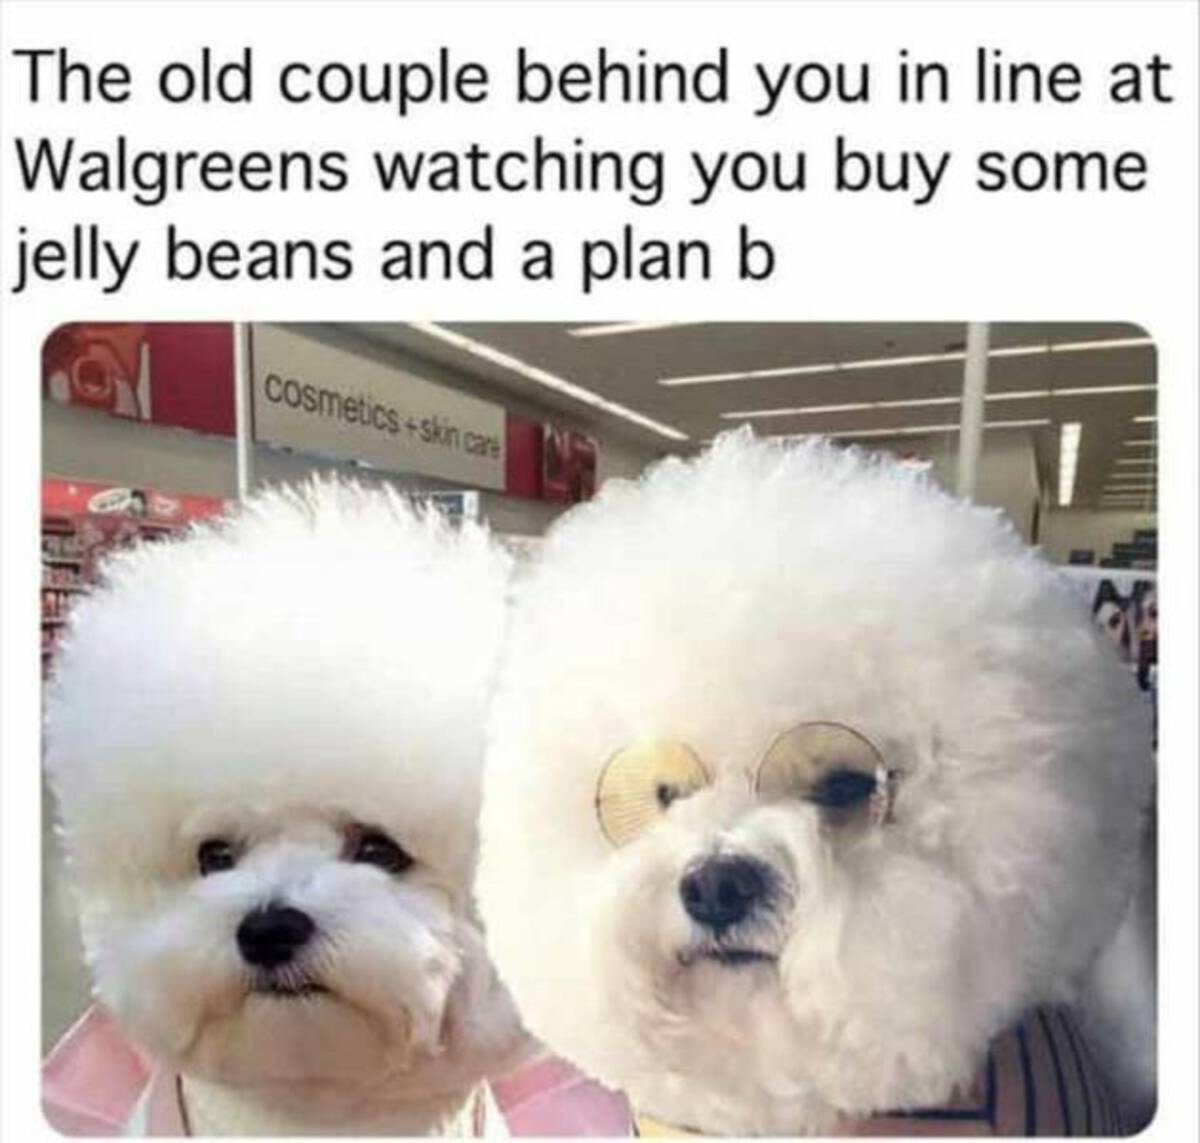 dog - The old couple behind you in line at Walgreens watching you buy some jelly beans and a plan b Cosmeticsskin care